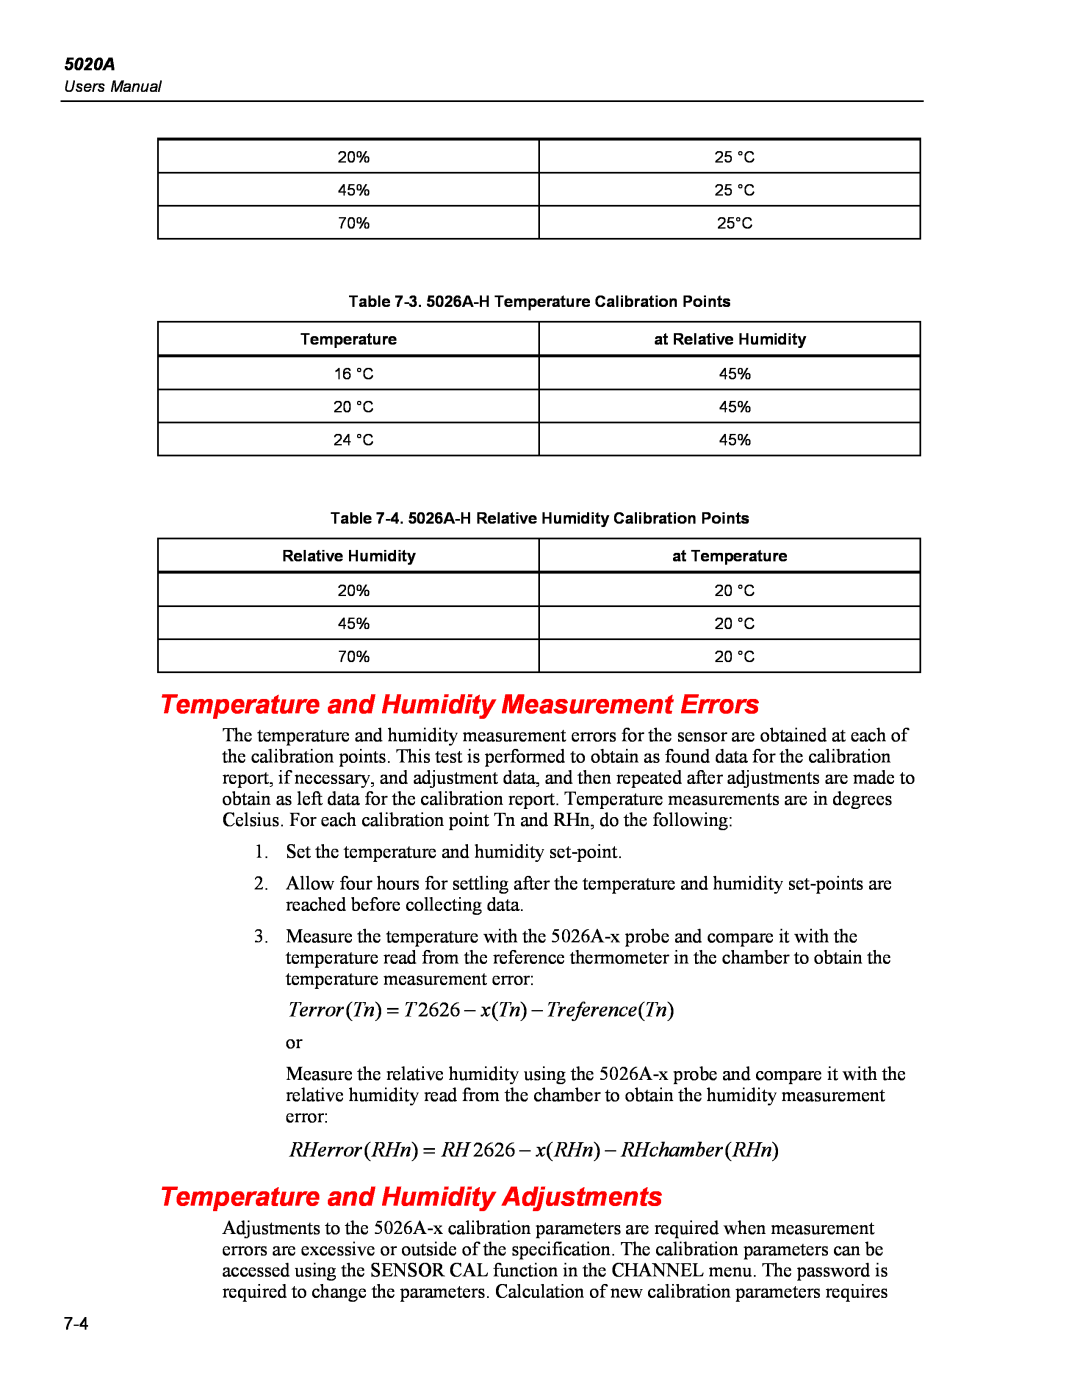 Fluke 5020A user manual Temperature and Humidity Measurement Errors, Temperature and Humidity Adjustments 